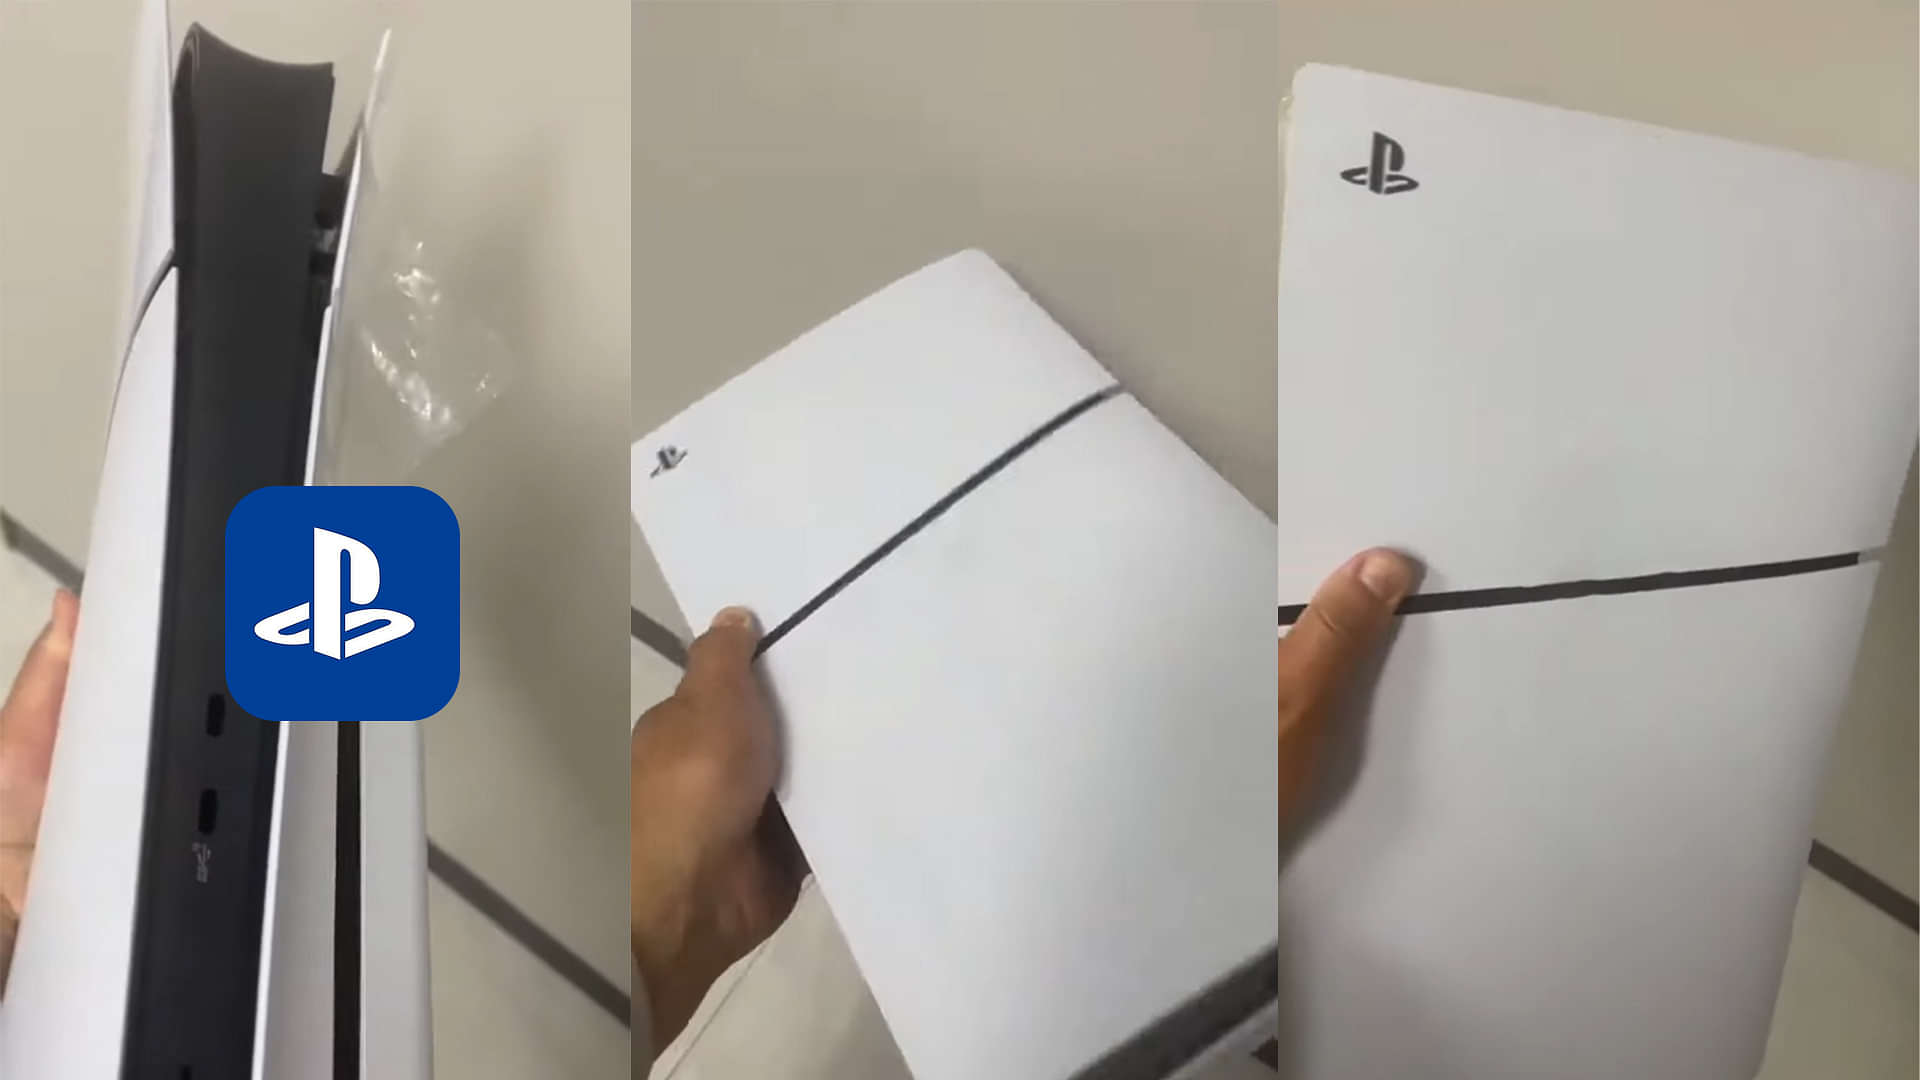 PS5 Slim vs PS5: do the specs, price and attachable disc drive